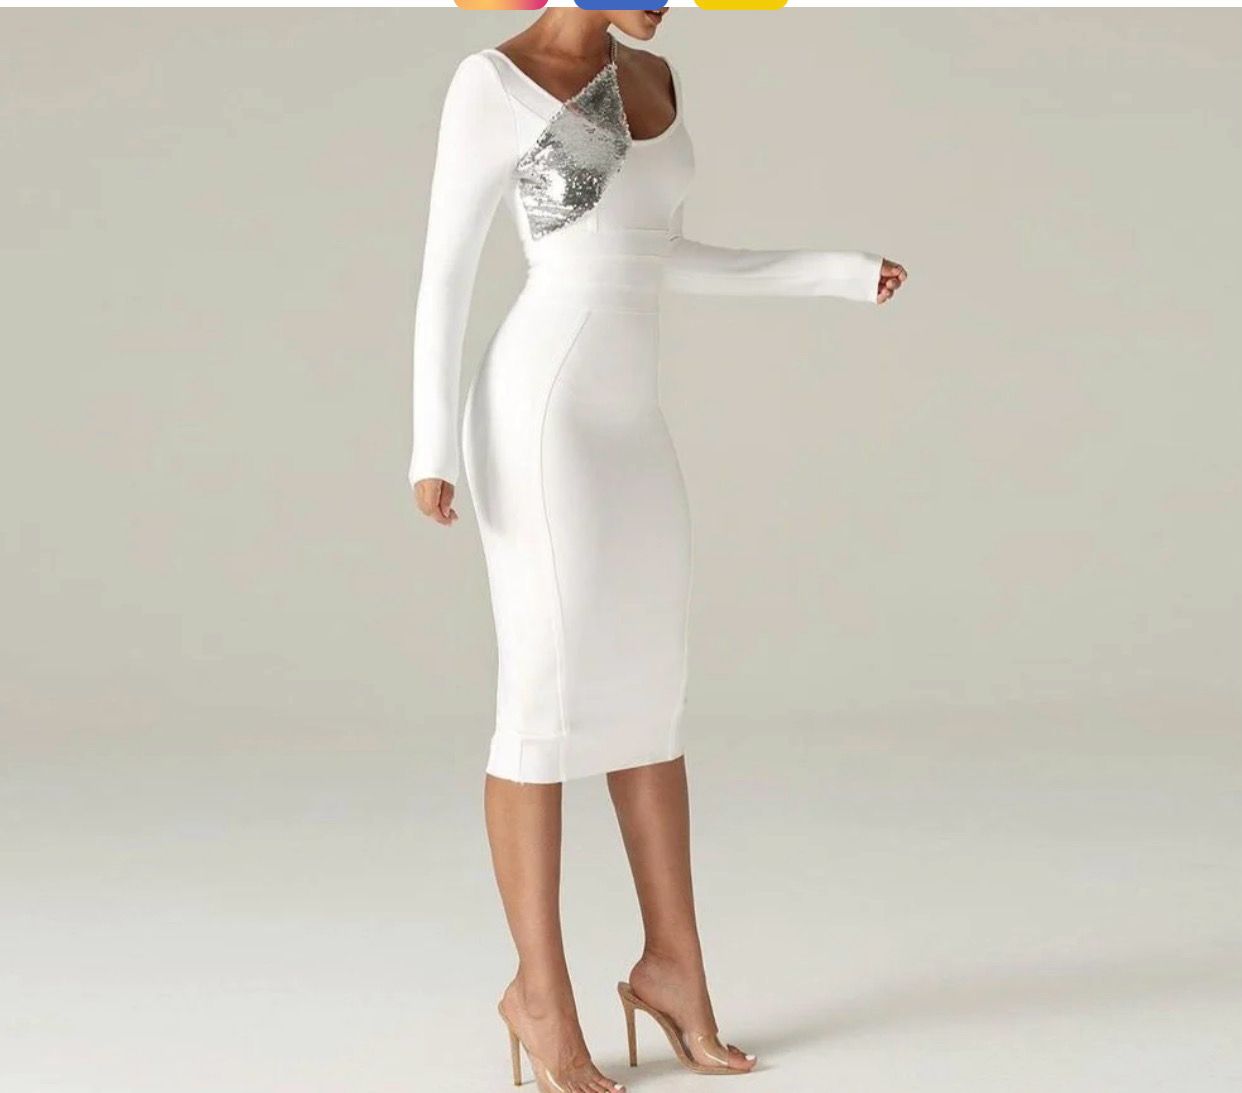 NEXT DAY DELIVERY DORIAN  Round Neck Long Sleeve Sequined Midi Bandage Dress